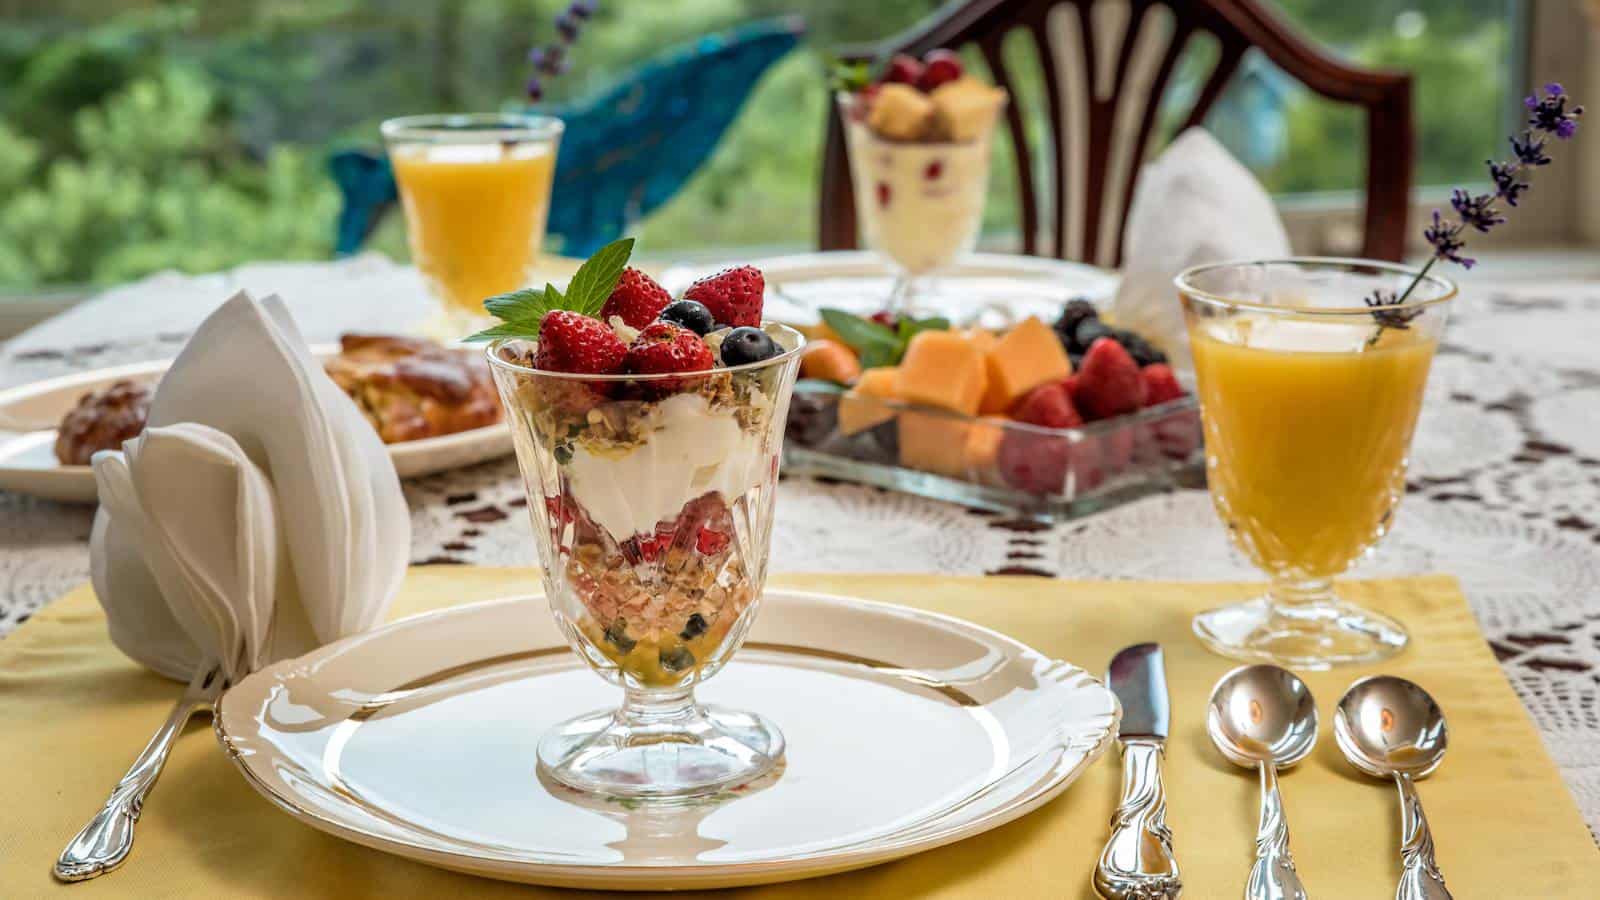 Close up view of fruit parfait in clear glass cup sitting on white plate with other breakfast dishes in the background